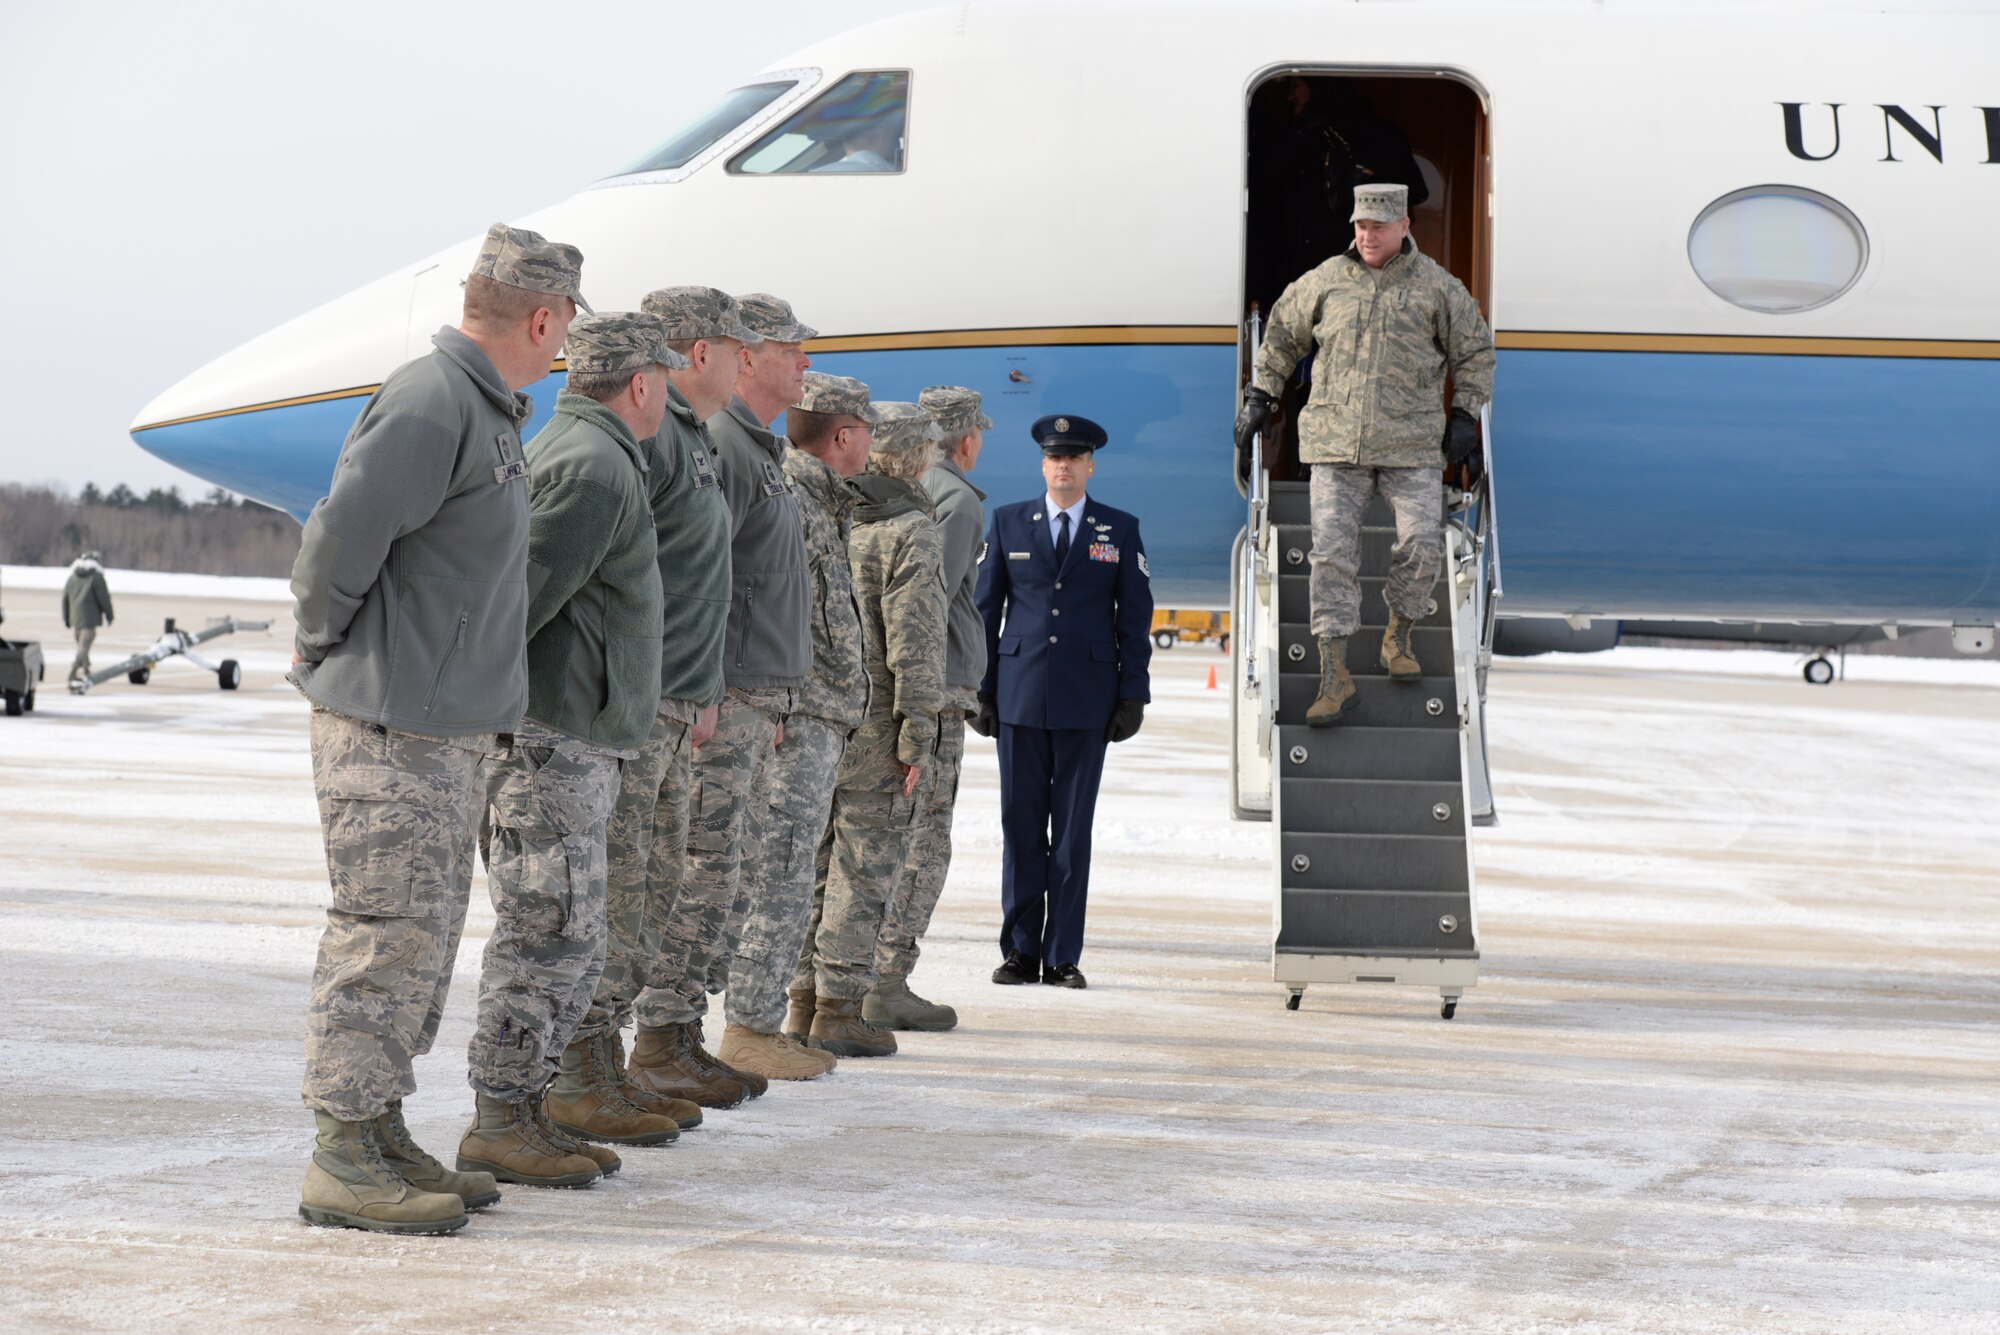 General Mark A. Welsh III, Chief of Staff of the United States Air Force disembarks from his aircraft on Feb 17, 2015 at Pease Air National Guard Base, N.H. Welsh visited the base to speak to Airmen and community leaders as well as discuss the base’s next aircraft, the KC-46 Pegasus.  (U.S. Air National Guard photo by Staff Sgt. Curtis J. Lenz)